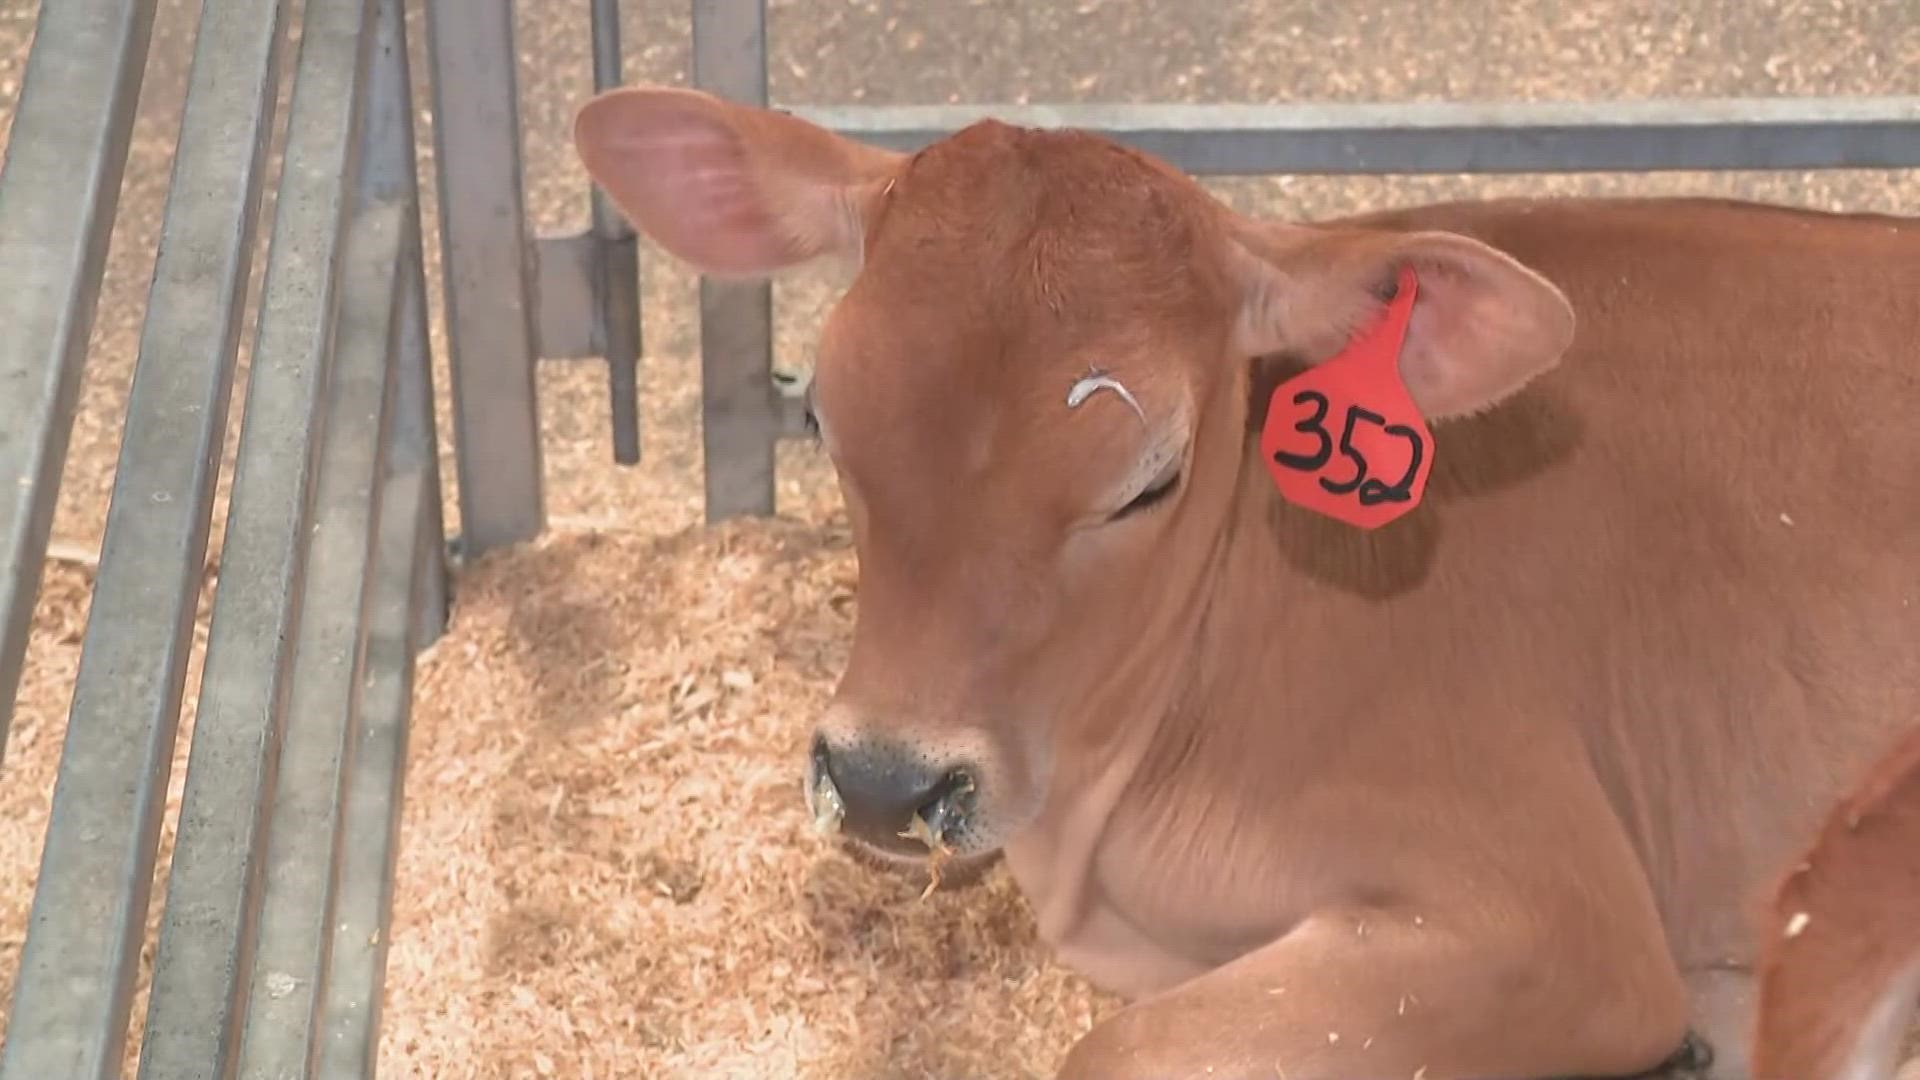 It's 10TV's Day at the Ohio State Fair! Wake Up CBUS is meeting twin calfs this morning.